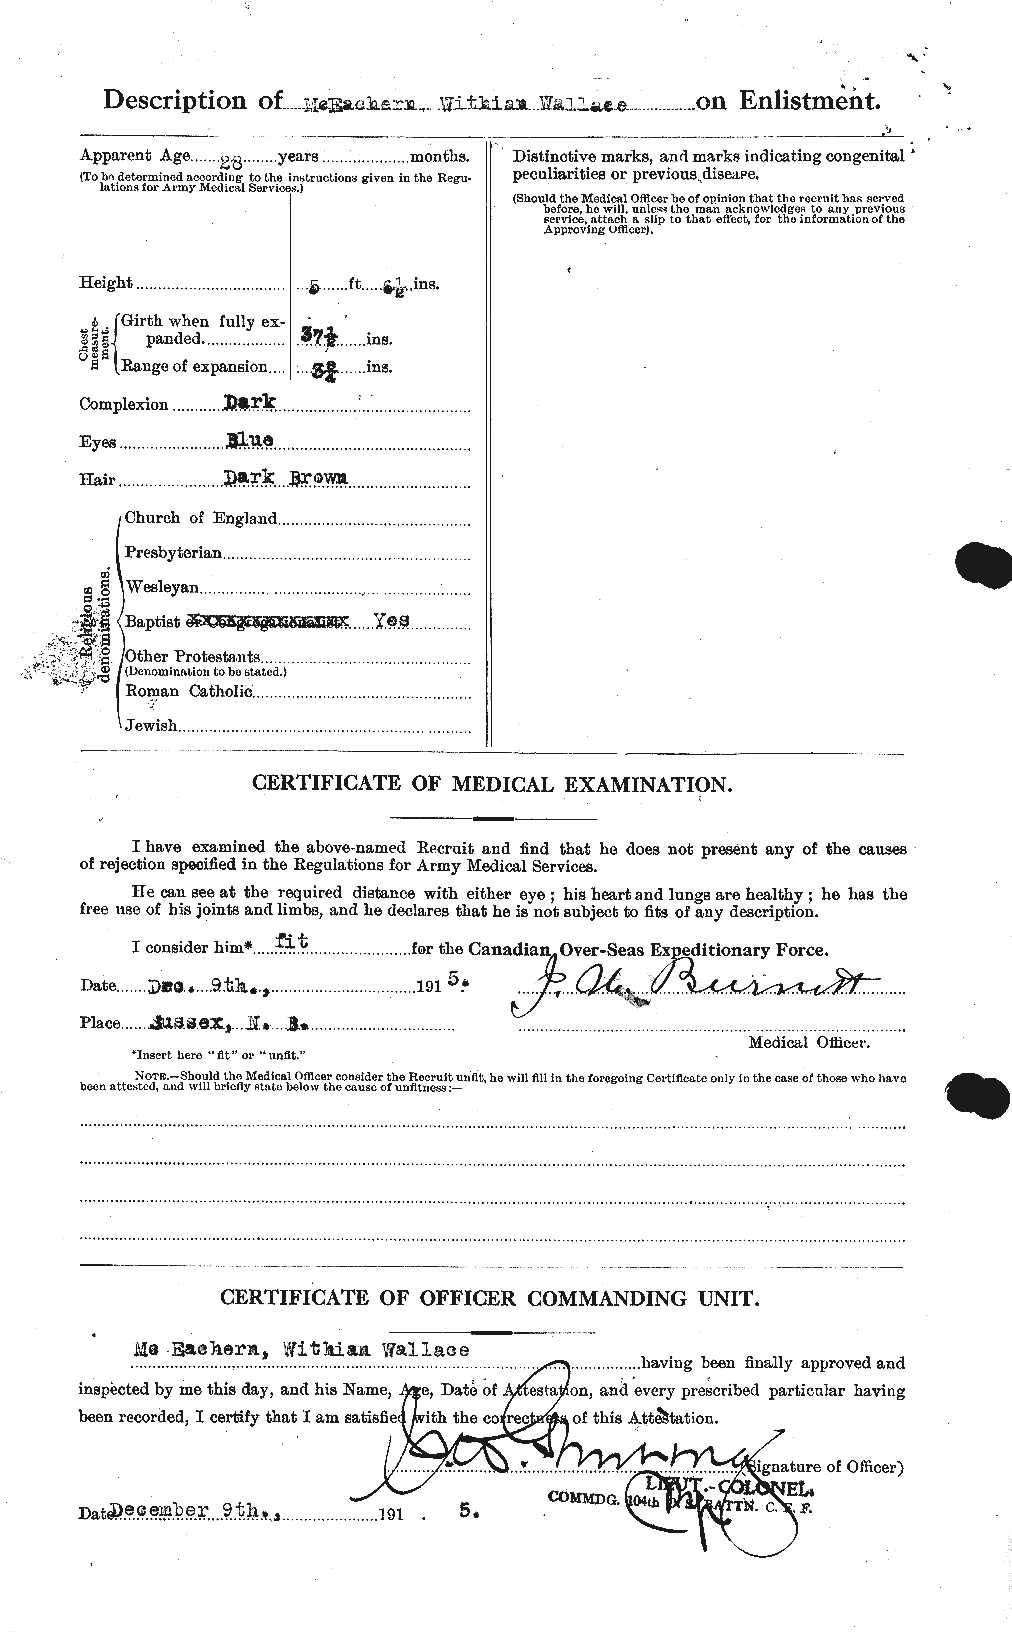 Personnel Records of the First World War - CEF 521928b